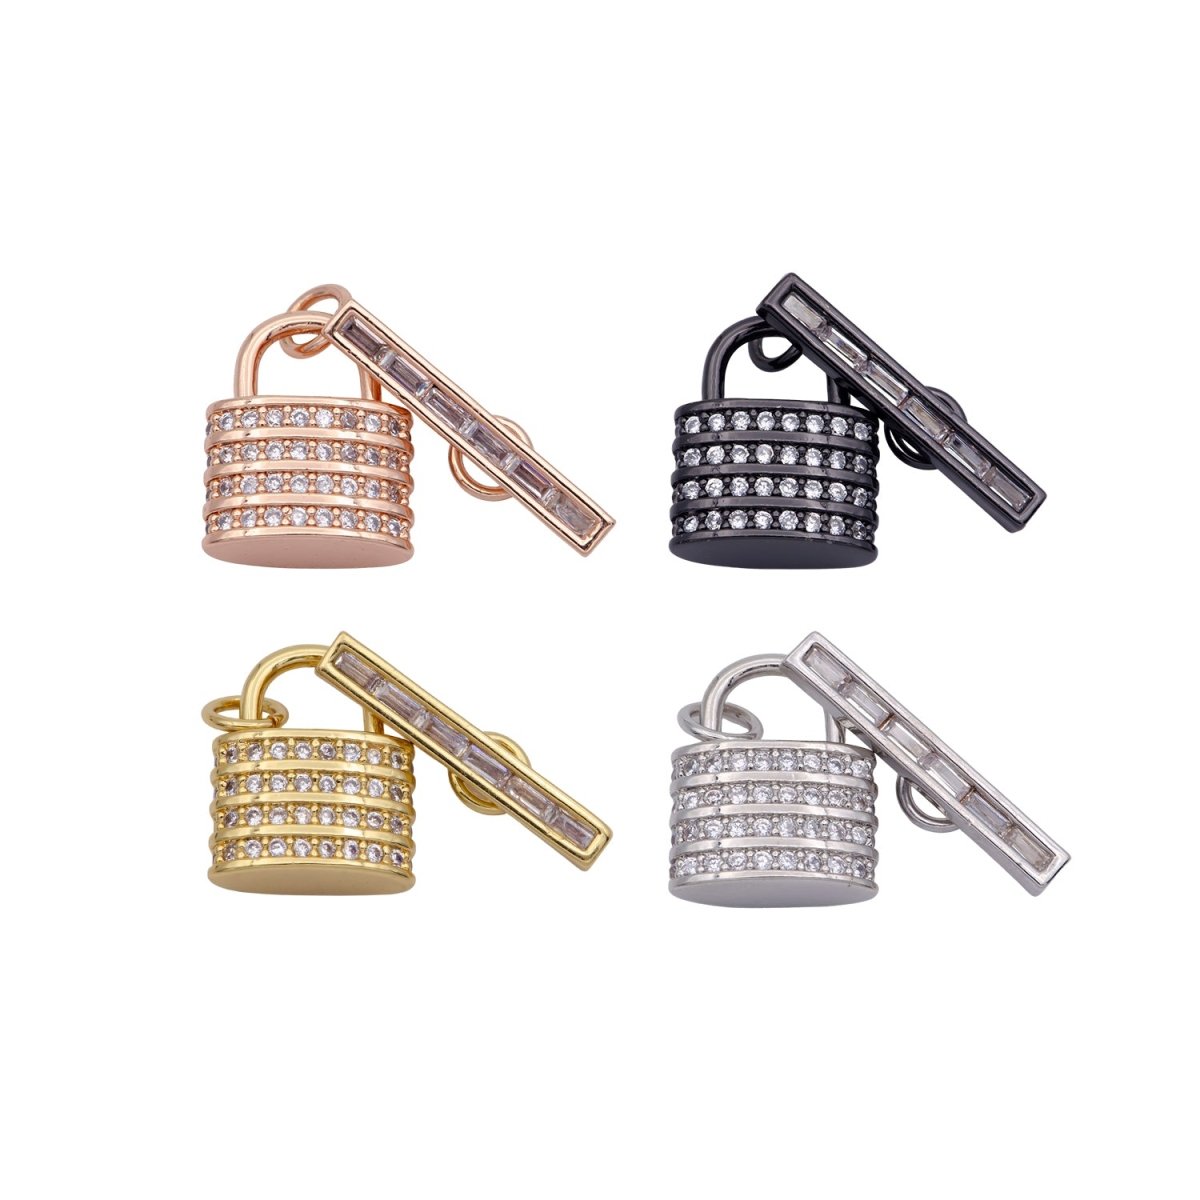 Micro Pave CZ Toggle Clasps, T-Bar, Clasp Connector, Padlock Toggle Clasp, Silver Toggle Clasps Rose Gold Cubic Clasp Jewelry Making, K-526 K-527 - DLUXCA